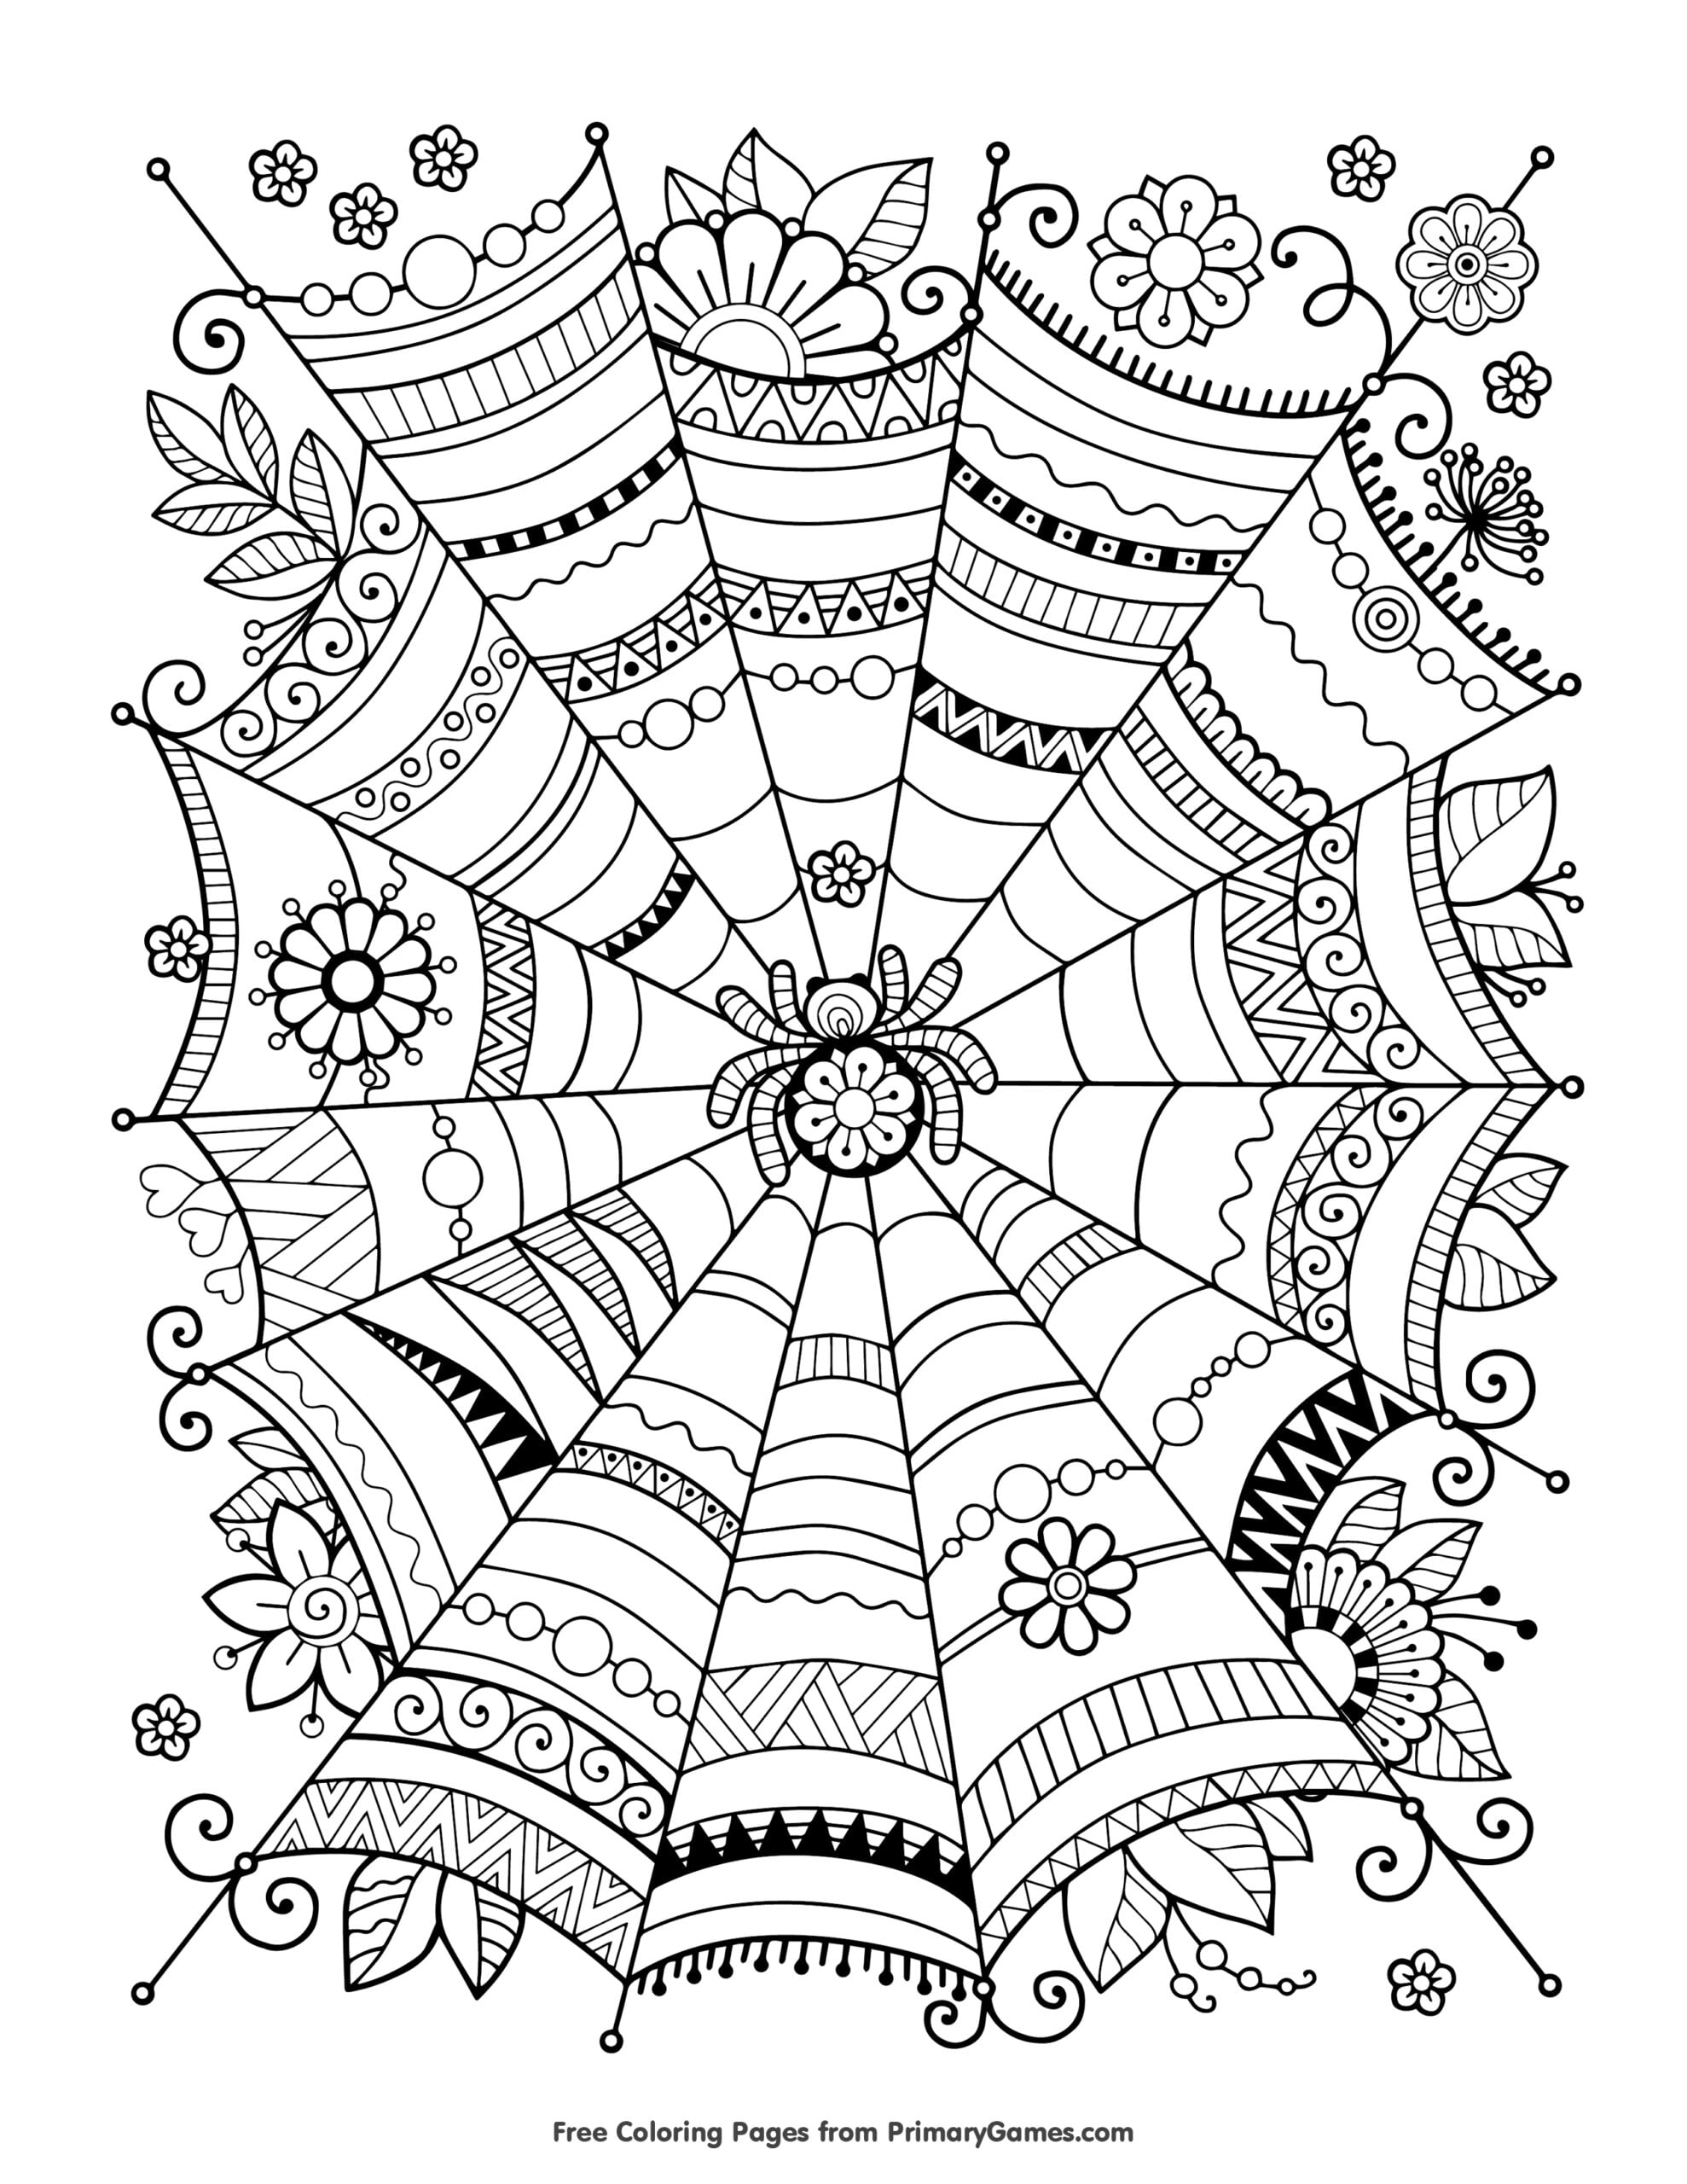 FREE Halloween Coloring Pages For Adults Kids Happiness Is Homemade